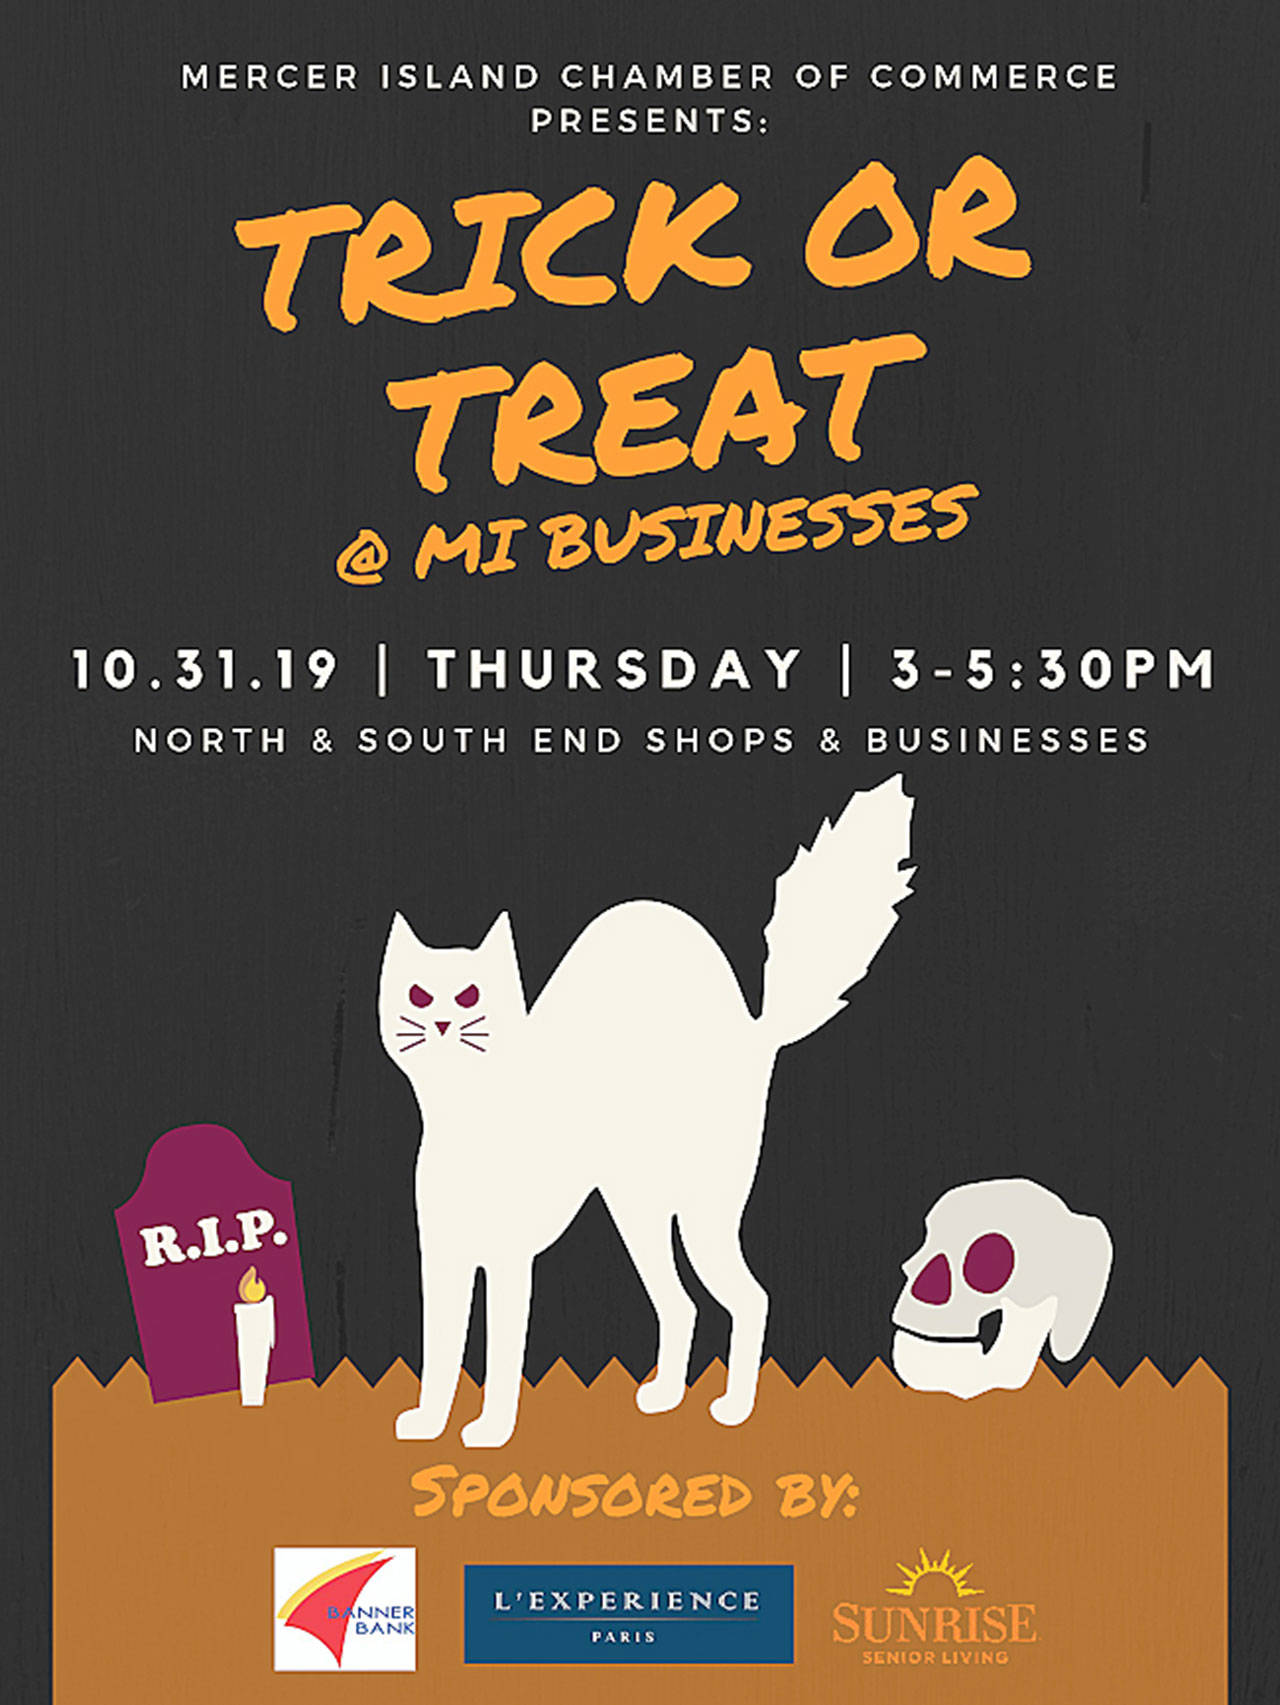 Trick or Treat at Mercer Island Businesses returns to the Island